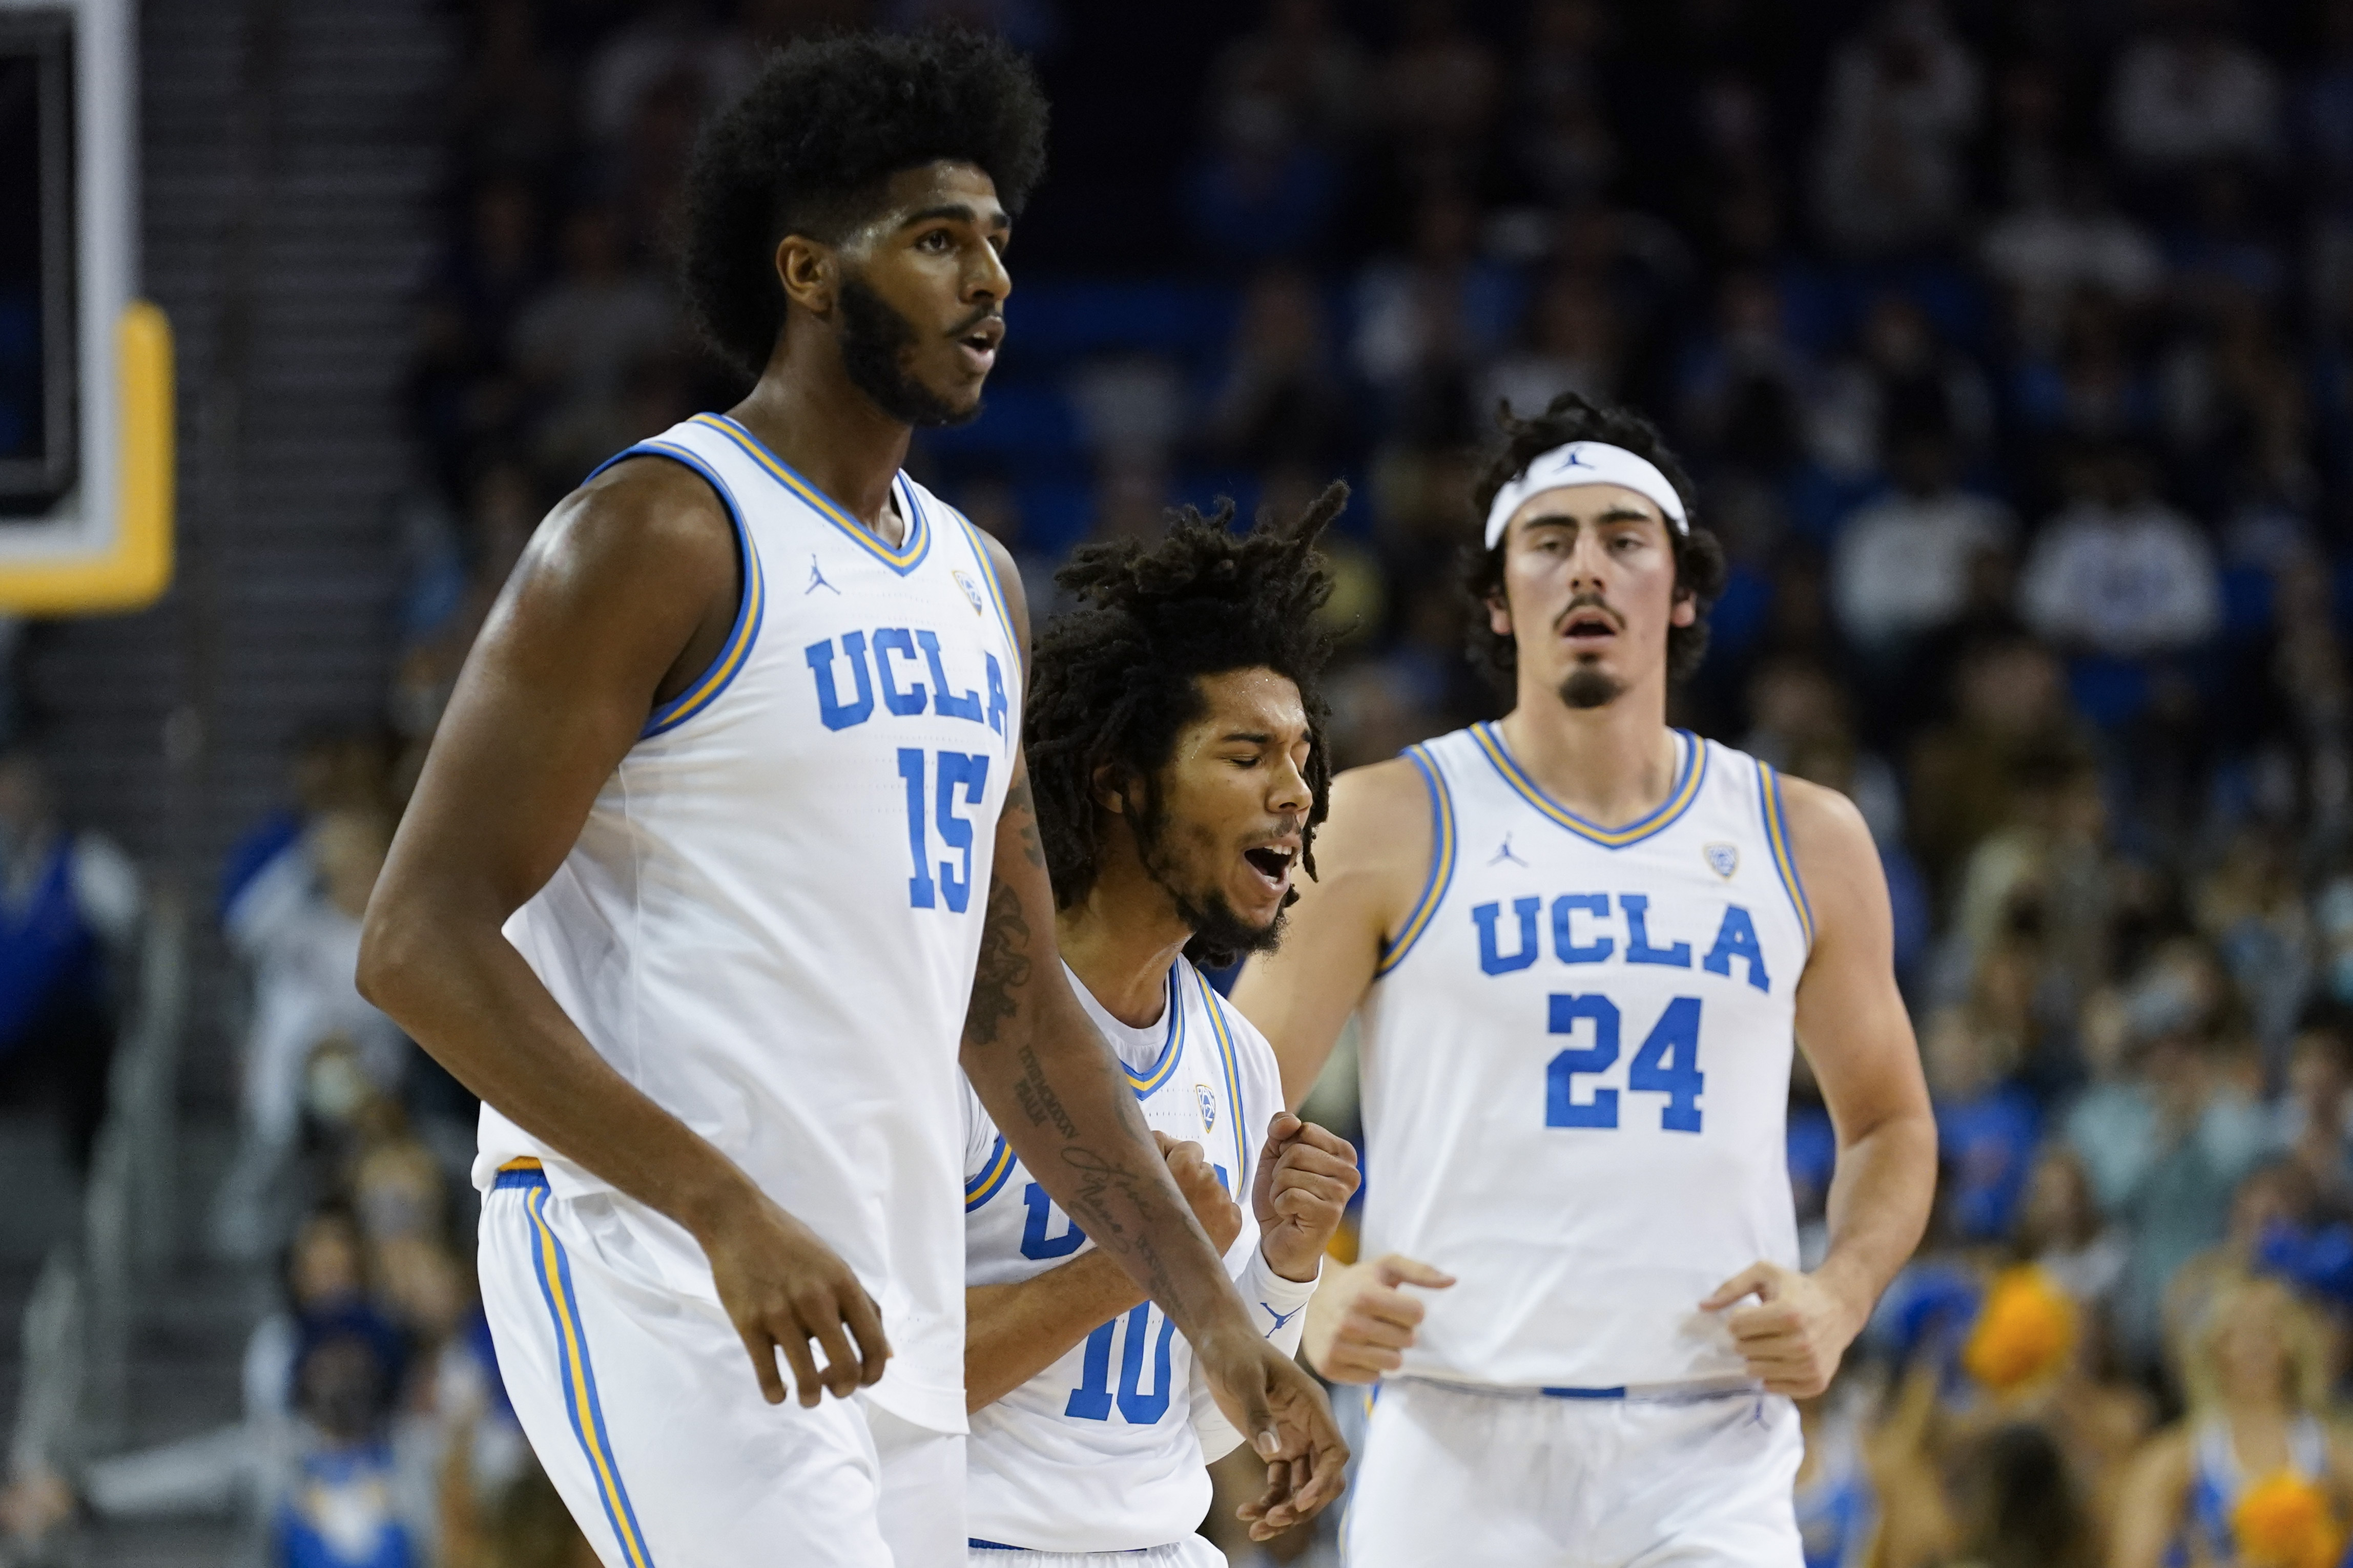 UCLA vs. UNC Men's Basketball in CBS Sports Classic Canceled Because of COVID-19